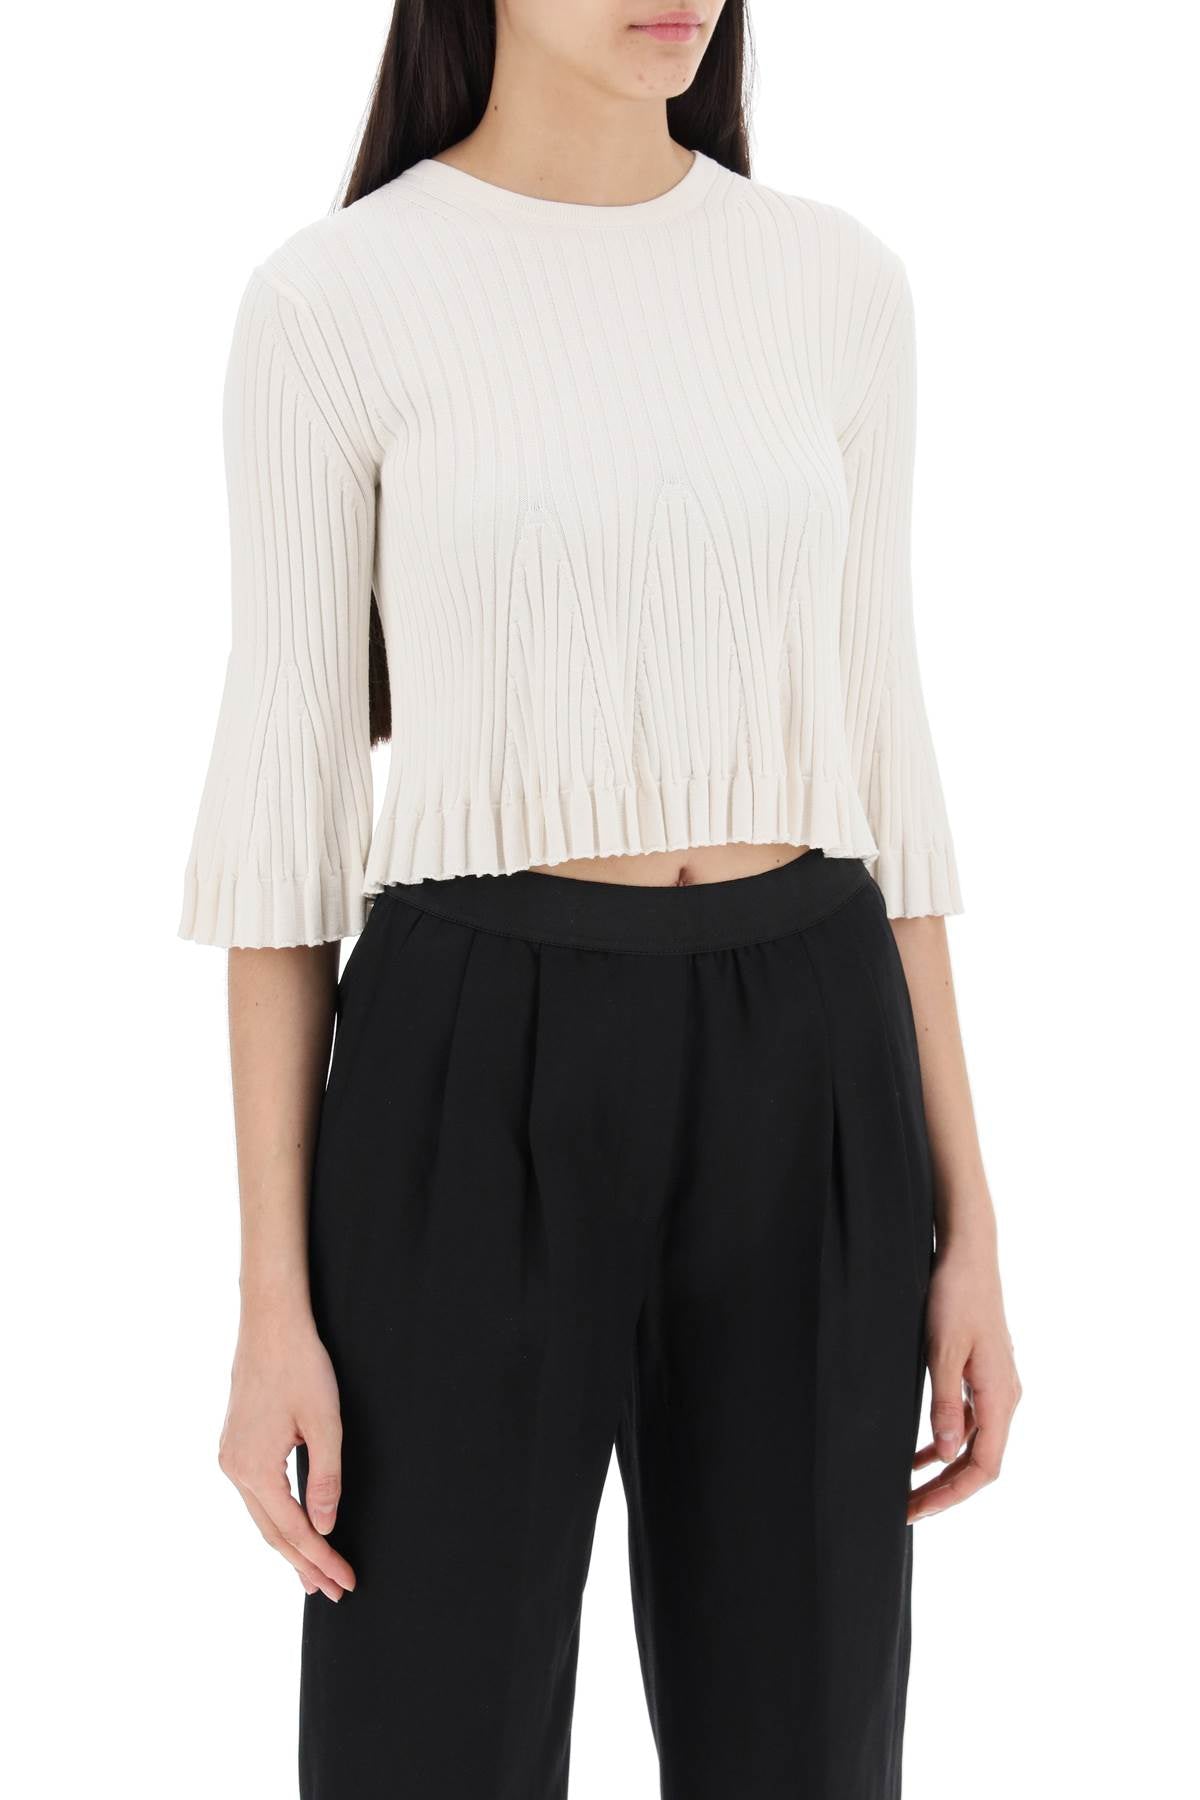 Loulou studio silk and cotton knit ammi crop top in-1